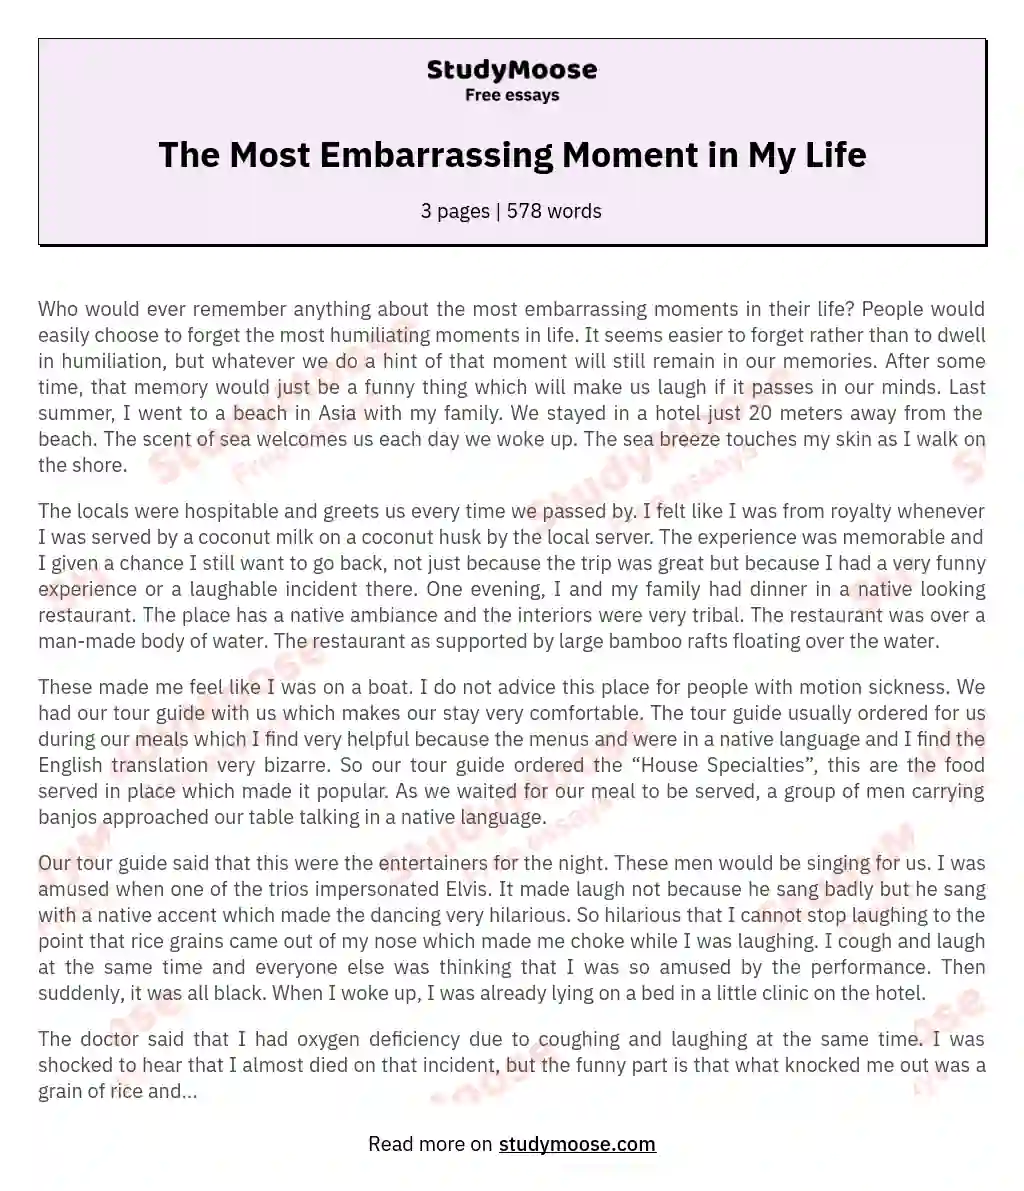 The Most Embarrassing Moment In My Life Free Essay Example